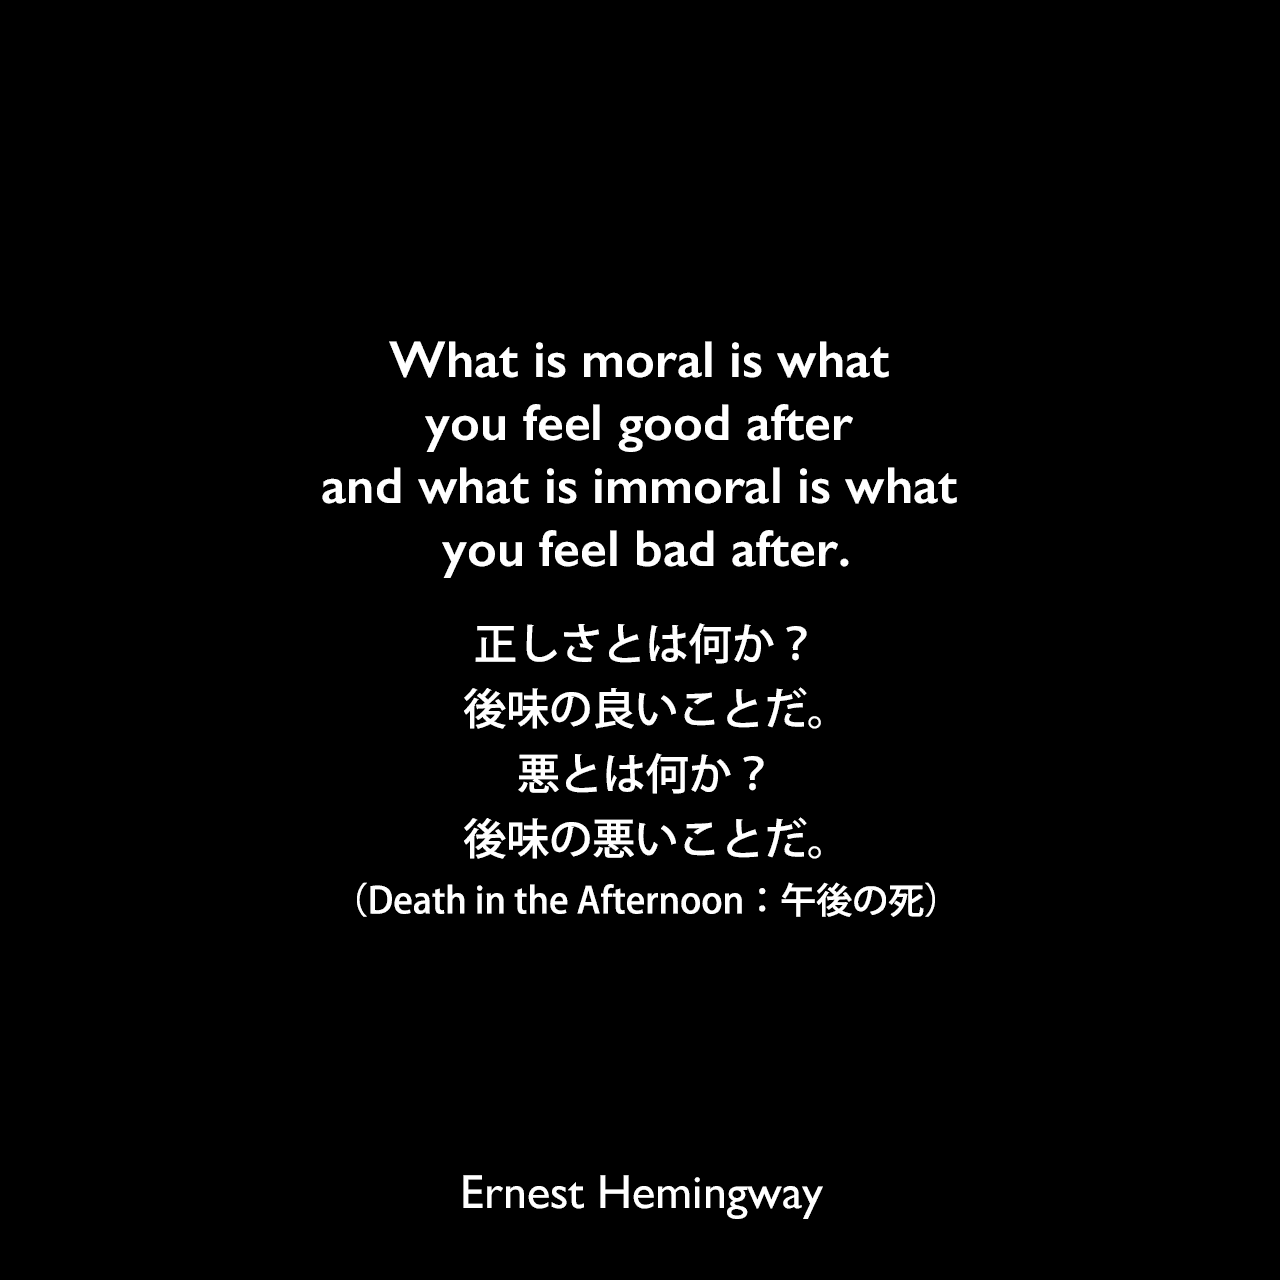 What is moral is what you feel good after and what is immoral is what you feel bad after.正しさとは何か？後味の良いことだ。悪とは何か？後味の悪いことだ。（Death in the Afternoon：午後の死）Ernest Hemingway